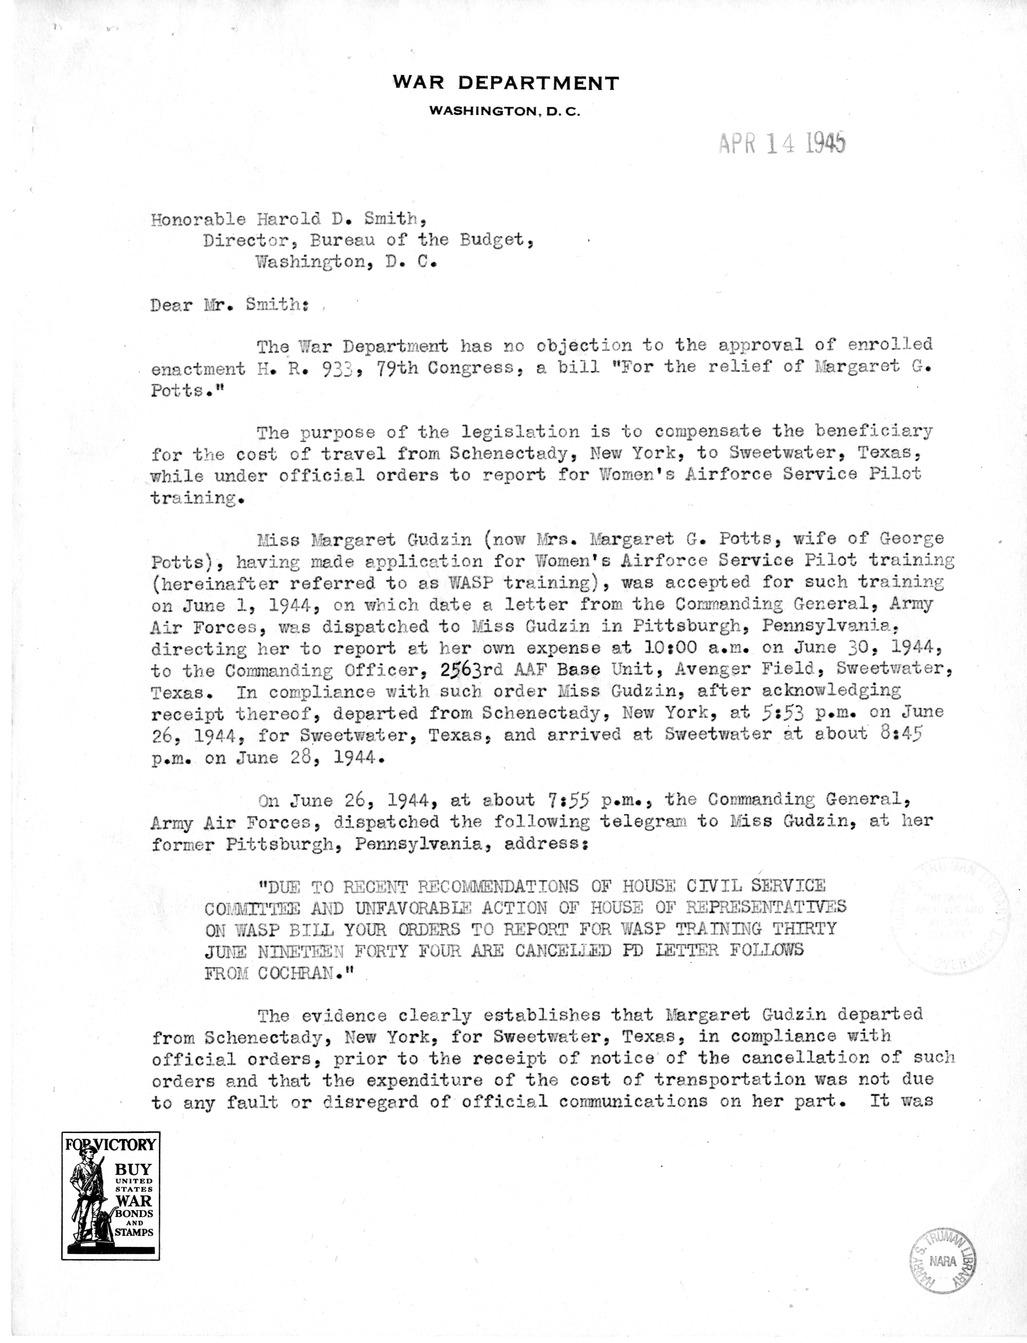 Memorandum from Frederick J. Bailey to M. C. Latta, H.R. 933, For the Relief of Margaret G. Potts, with Attachments